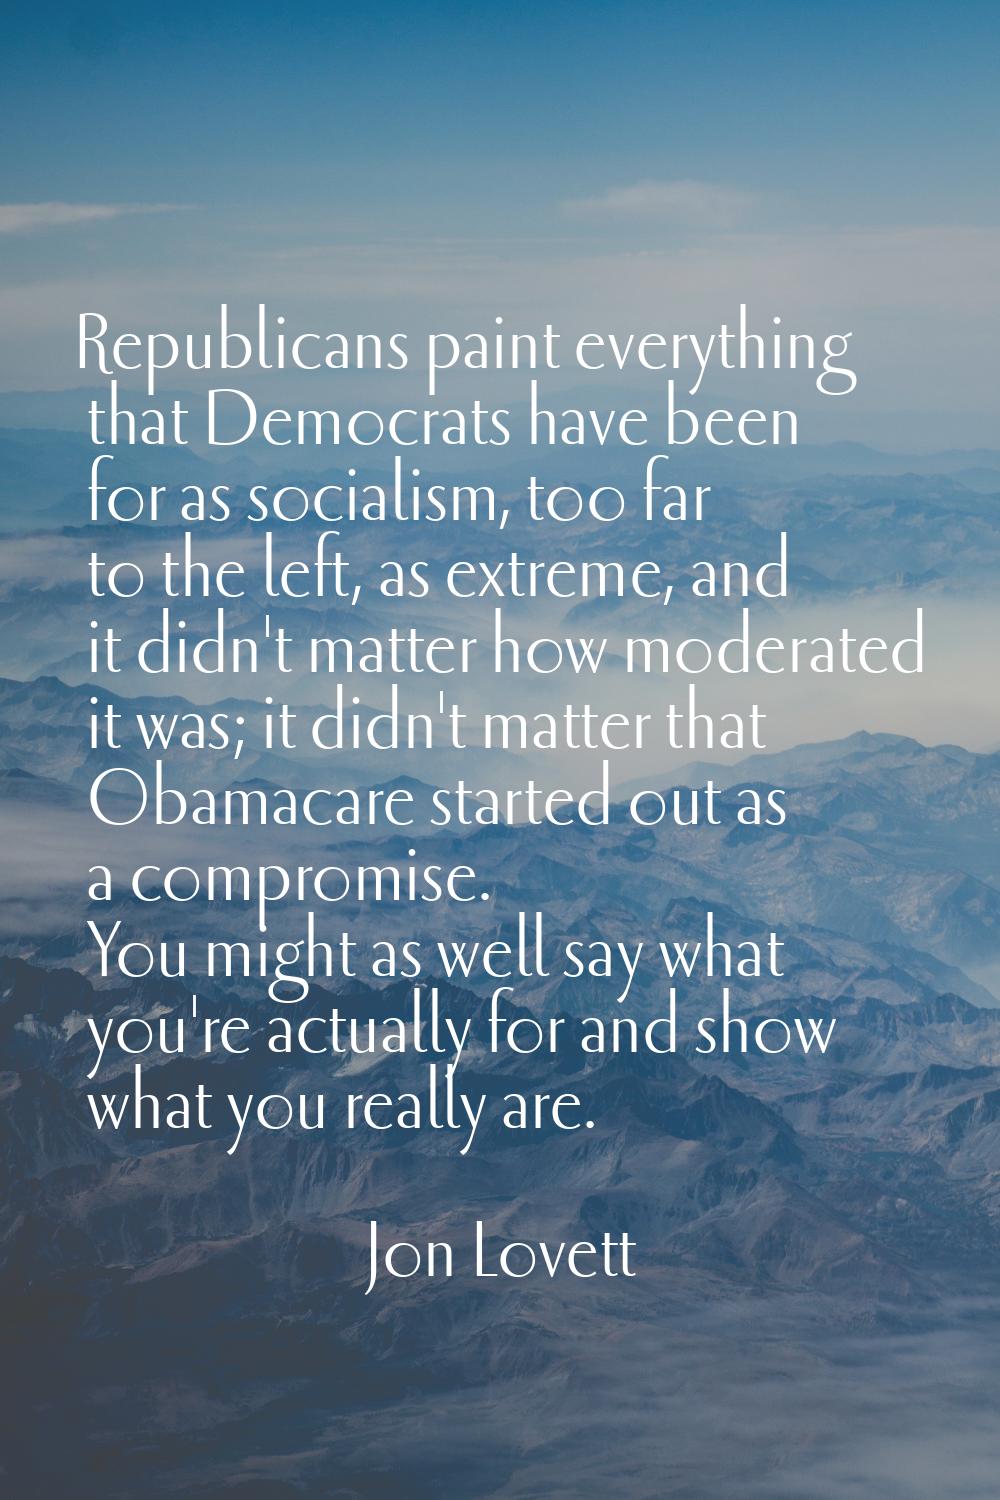 Republicans paint everything that Democrats have been for as socialism, too far to the left, as ext